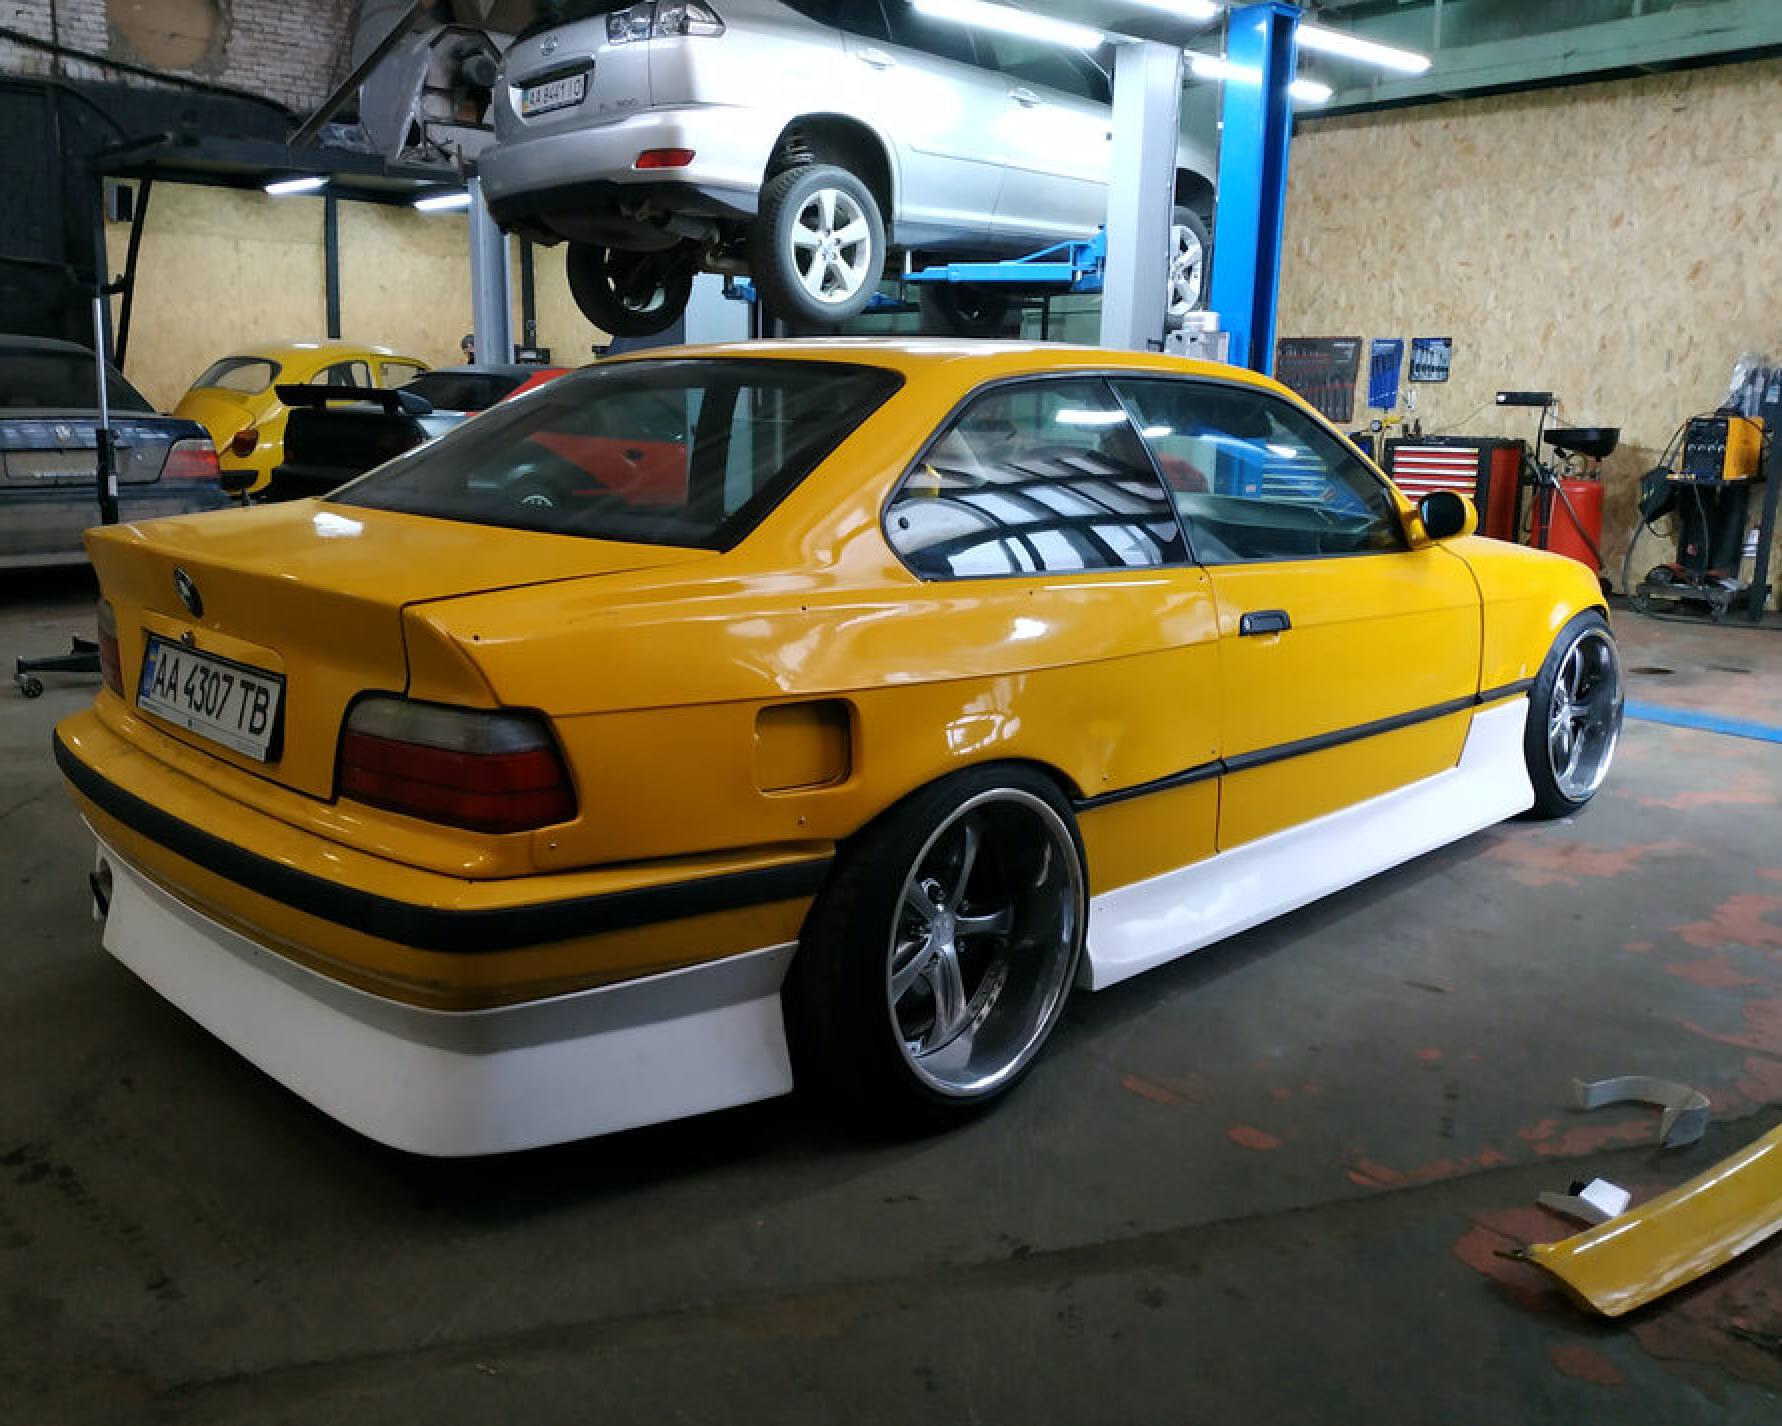 TALONERAS LOOK HM BMW E36 COUPE - JAPAN TUNING